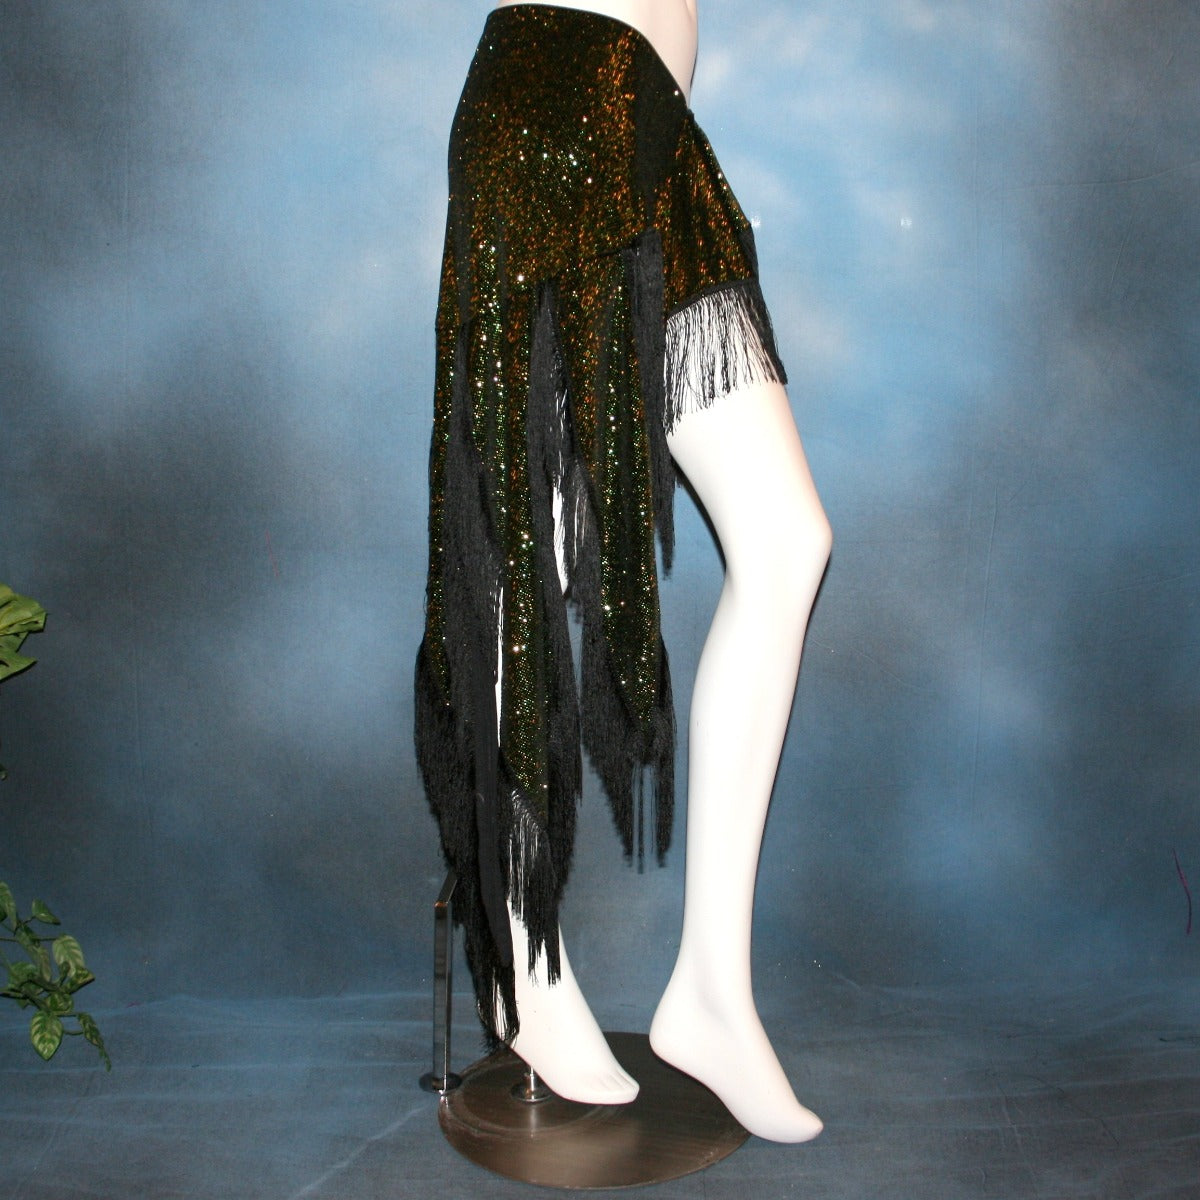 side view of Green Latin/skirt skirt, wrap style, was created with luxurious green glitter slinky & chainette fringe. There is just enough of the gorgeous fabric to custom create a bodysuit to go with it for an extra fee, possibly two...one on the simple classy side for ballroom social dances & the other could be more elaborate with Swarovski work for ballroom showcases or competitions, making it a converta ballroom dance set!